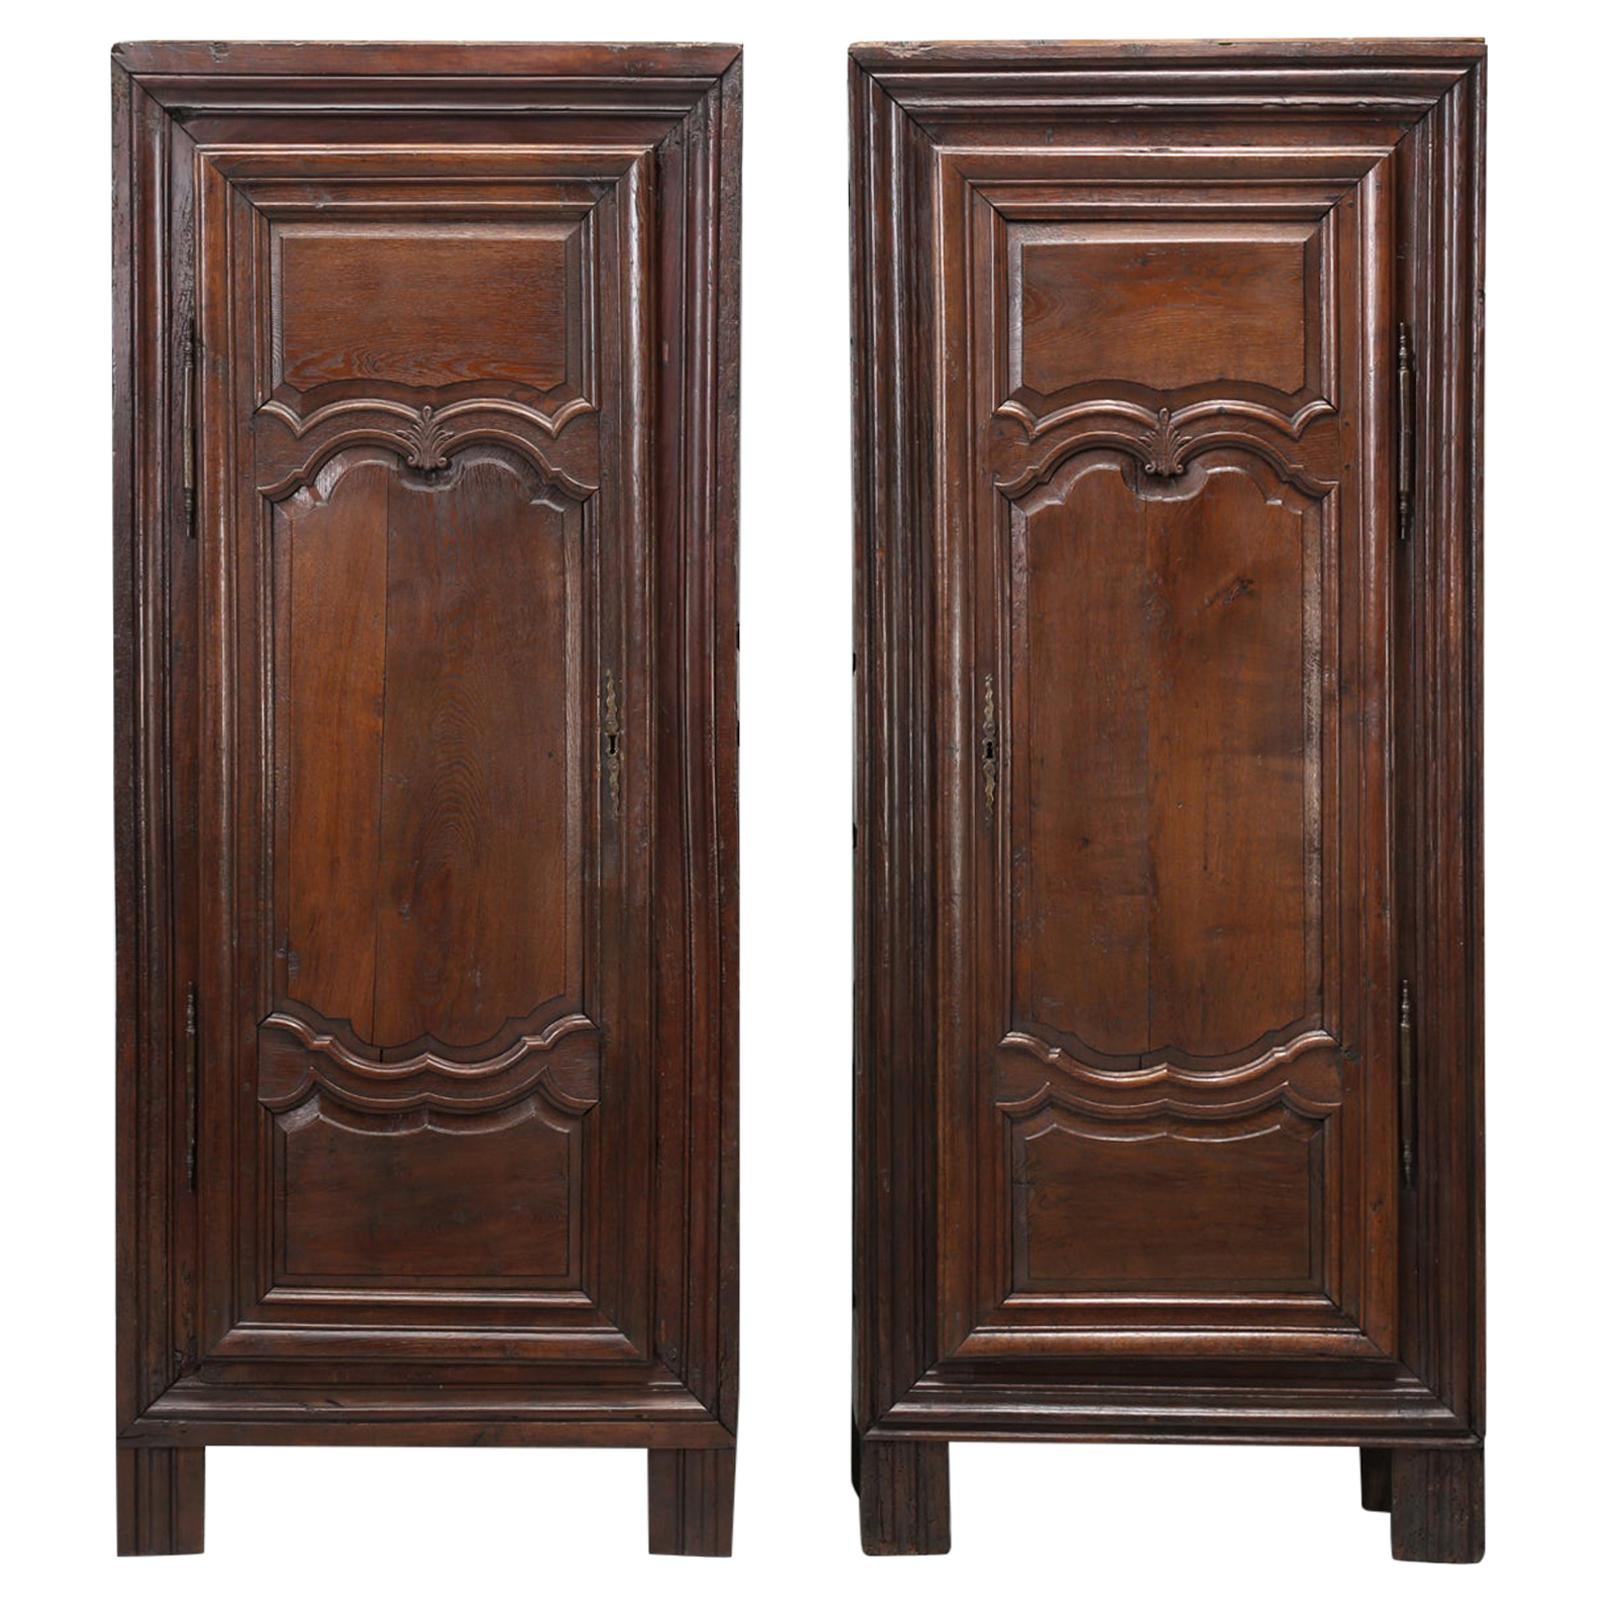 Antique Pair of French Oak Bonnetiere's, Amroires or Cupboards from the 1700s